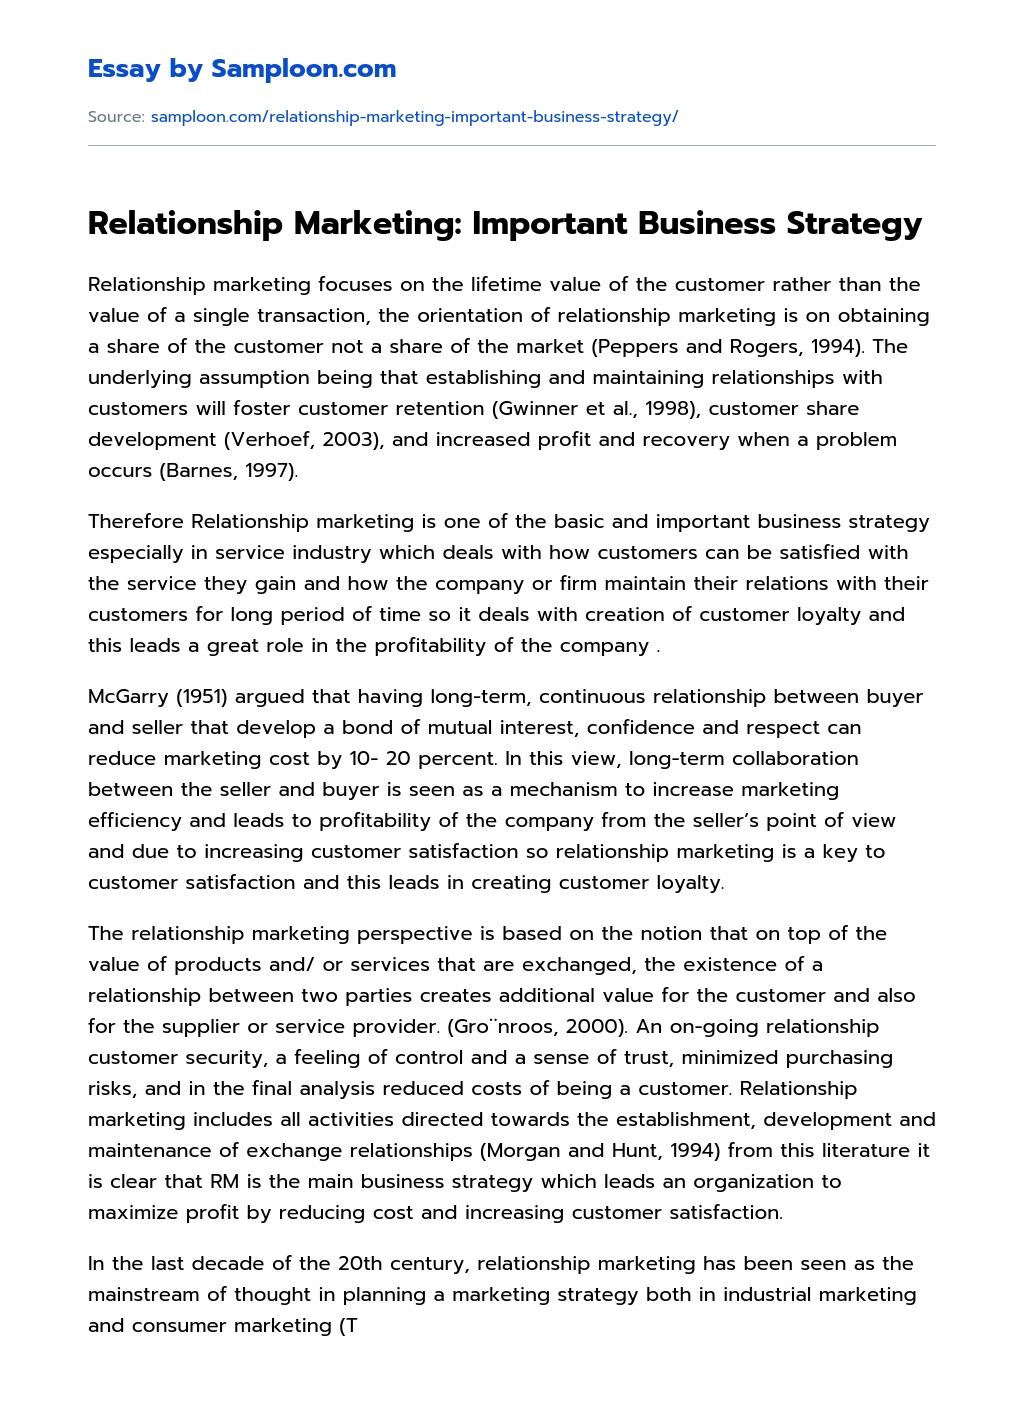 Relationship Marketing: Important Business Strategy essay